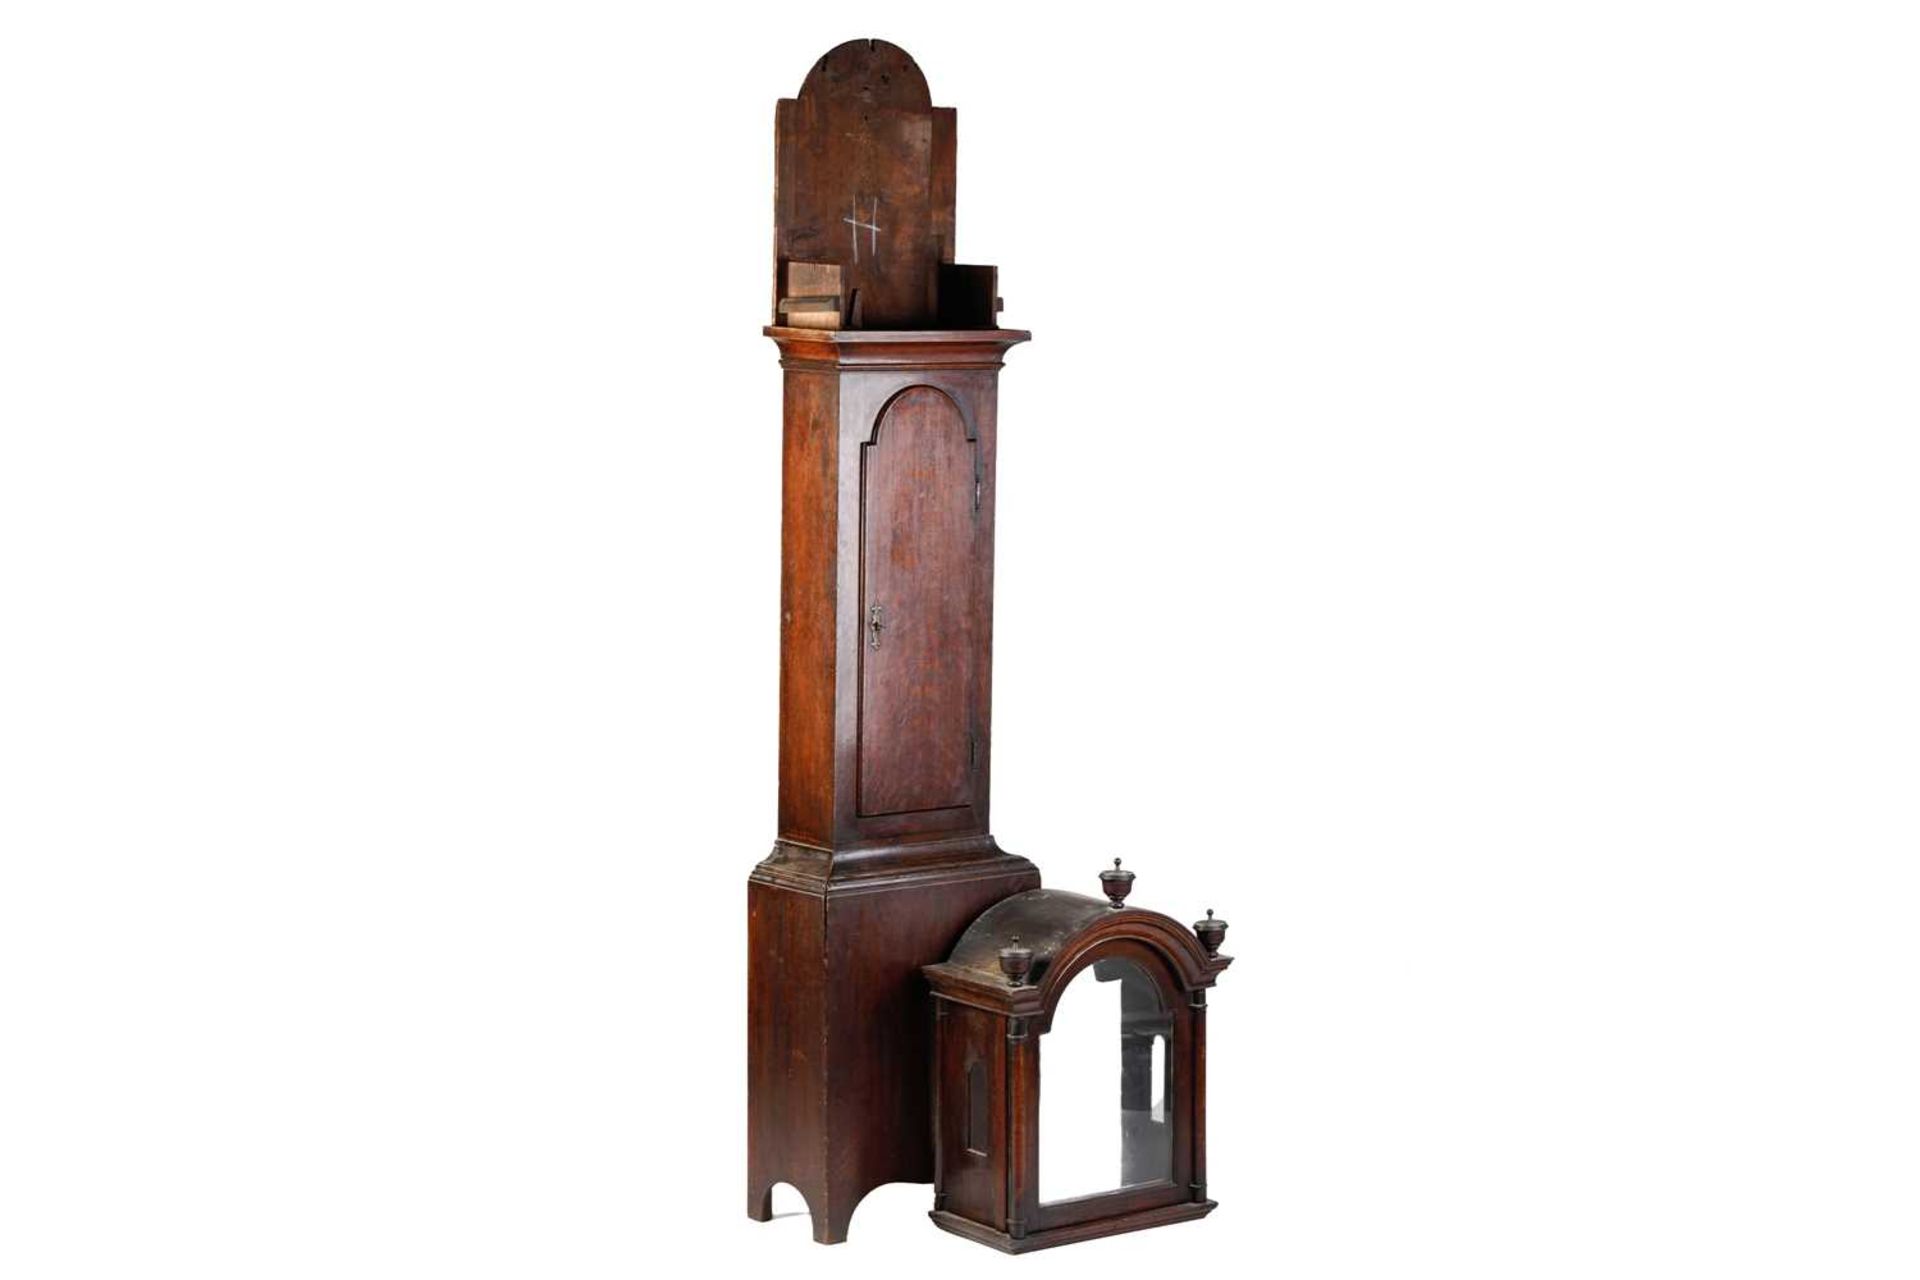 Philip Avenalll (II) of Farnham (Surrey); A George III oak-cased 8-day longcase clock, fitted with a - Image 12 of 19